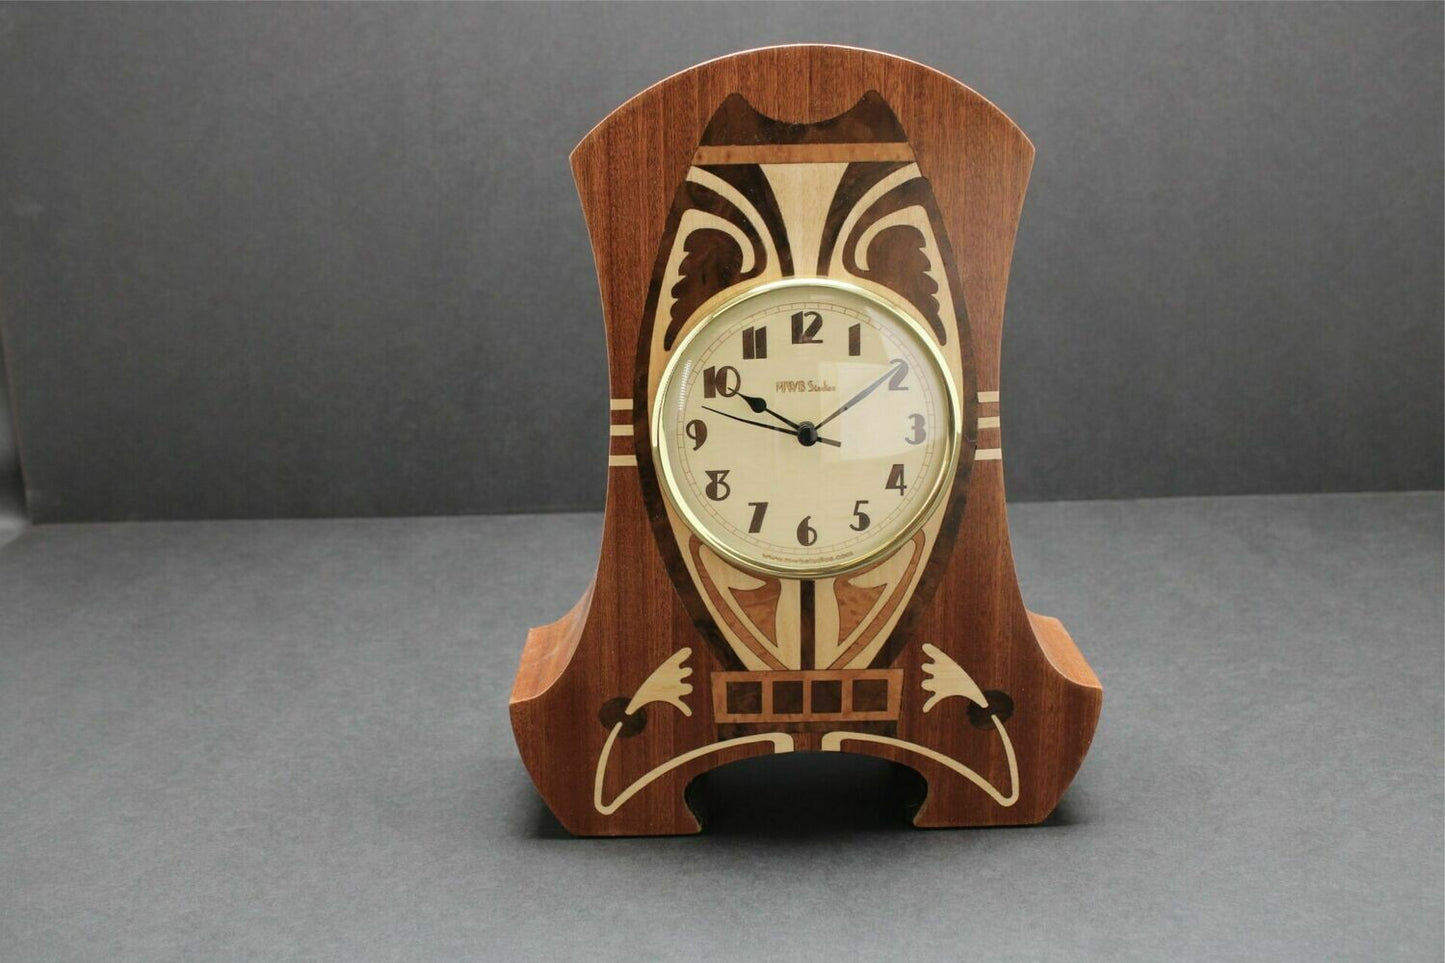 Handcrafted Mantle Clock - "Art Nouveau at its Finest" MC30   Made in the U.S.